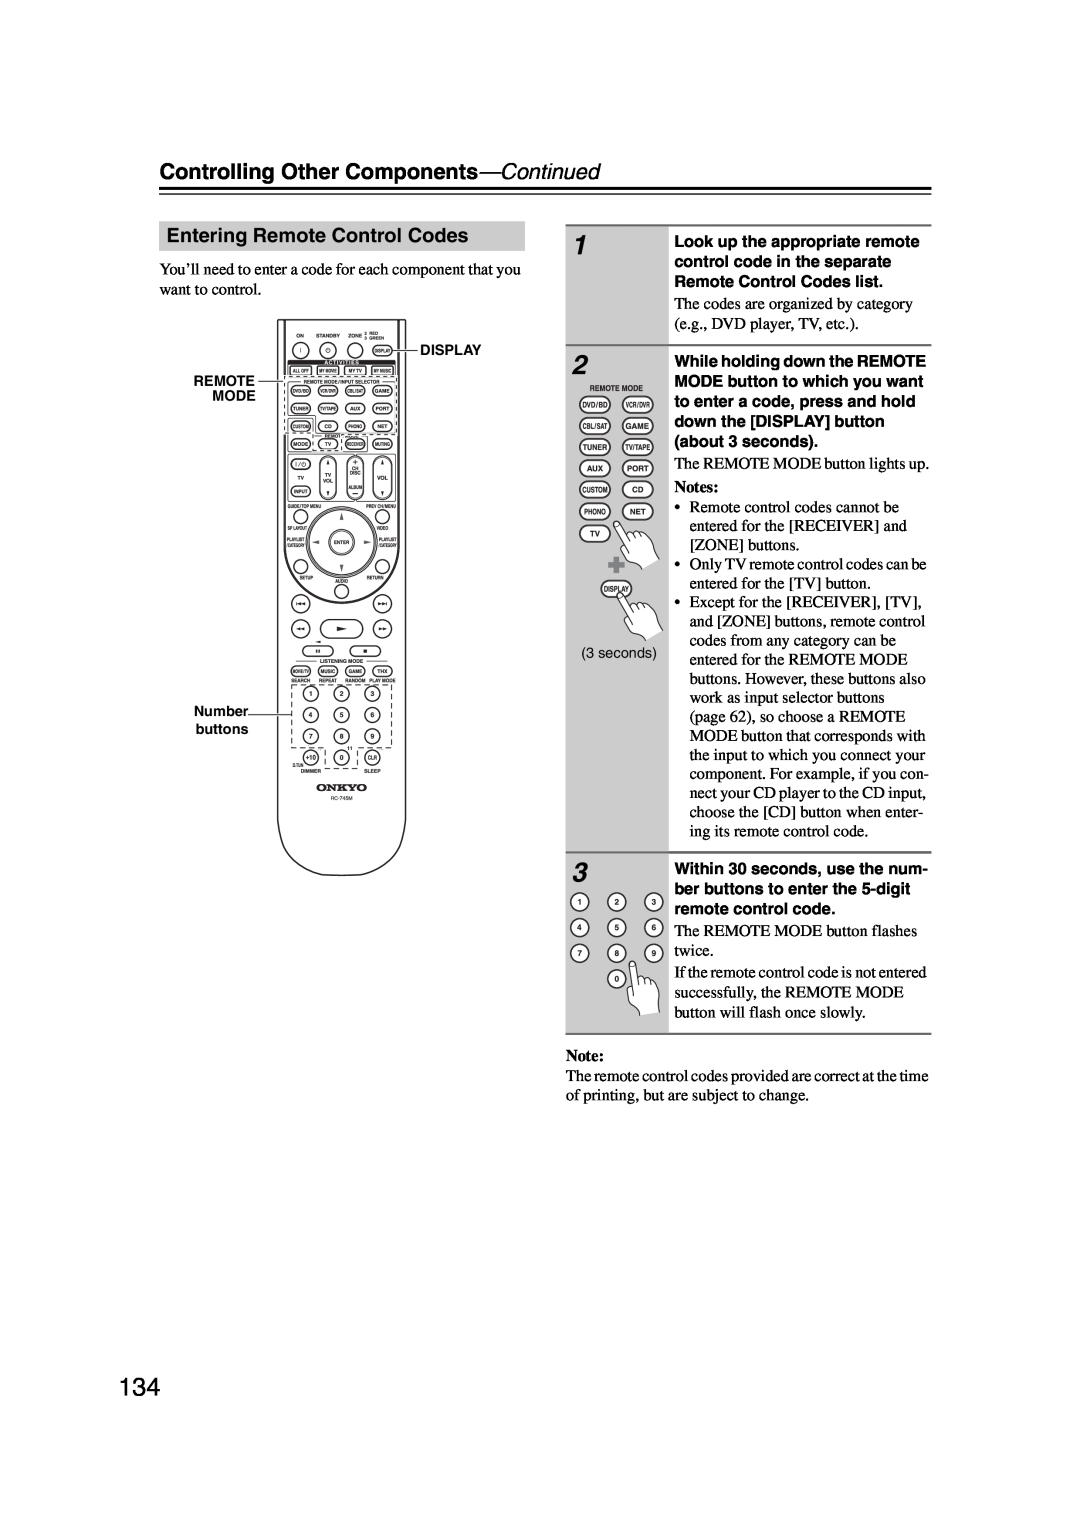 Onkyo TX-NR1007 Entering Remote Control Codes, Controlling Other Components—Continued, The codes are organized by category 